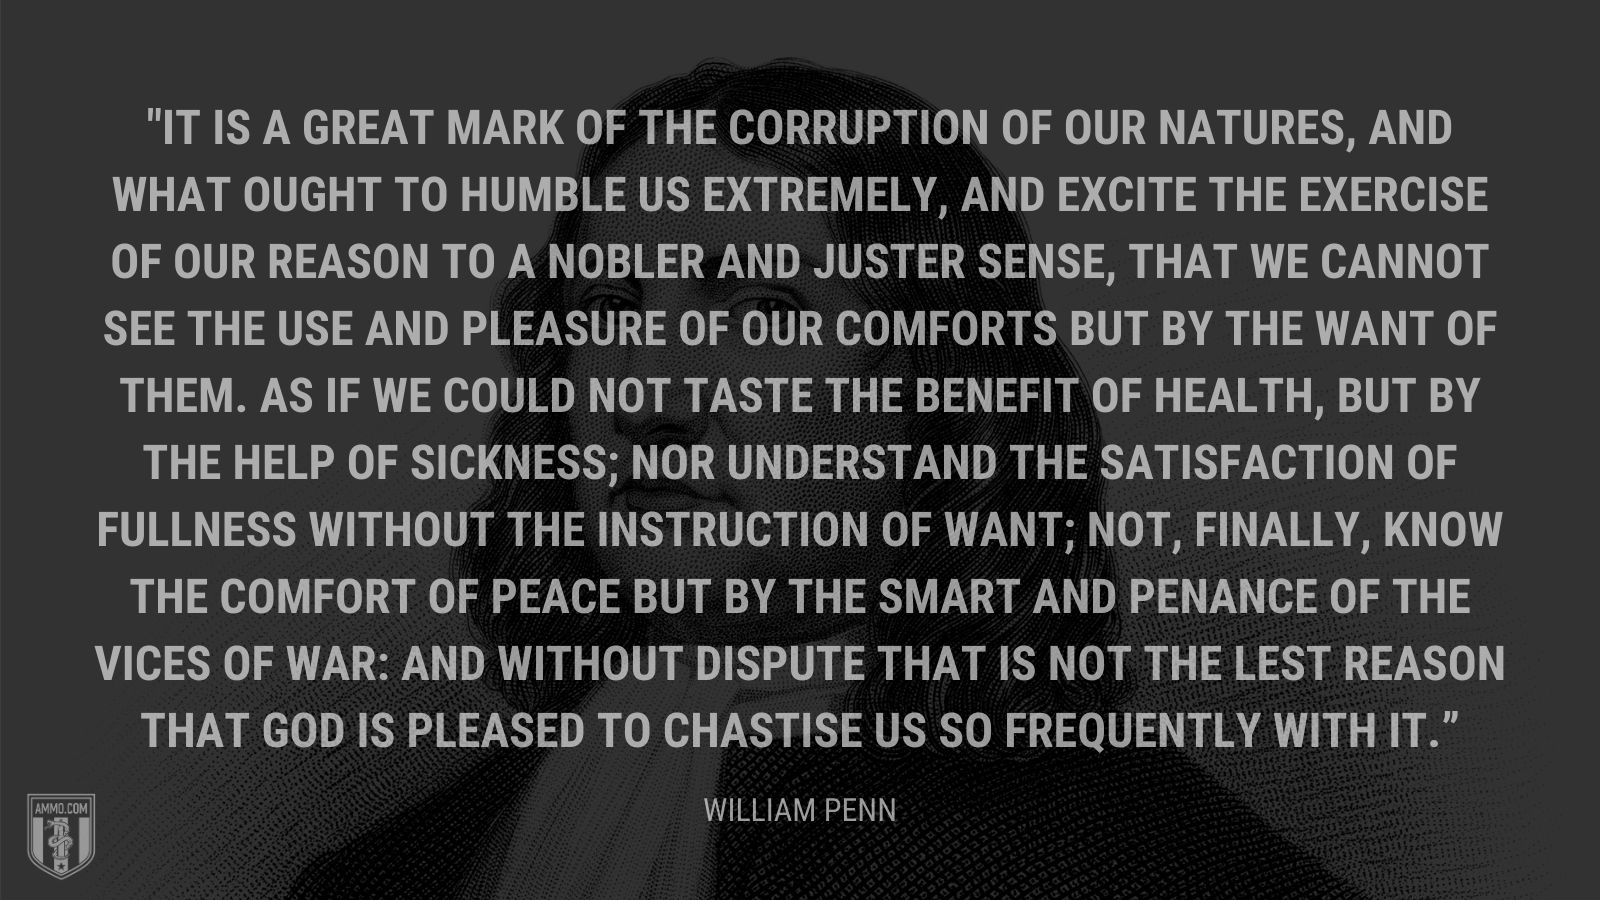 “It is a great mark of the corruption of our natures, and what ought to humble us extremely, and excite the exercise of our reason to a nobler and juster sense, that we cannot see the use and pleasure of our comforts but by the want of them. As if we could not taste the benefit of health, but by the help of sickness; nor understand the satisfaction of fullness without the instruction of want; not, finally, know the comfort of peace but by the smart and penance of the vices of war: And without dispute that is not the lest reason that God is pleased to chastise us so frequently with it.” - William Penn